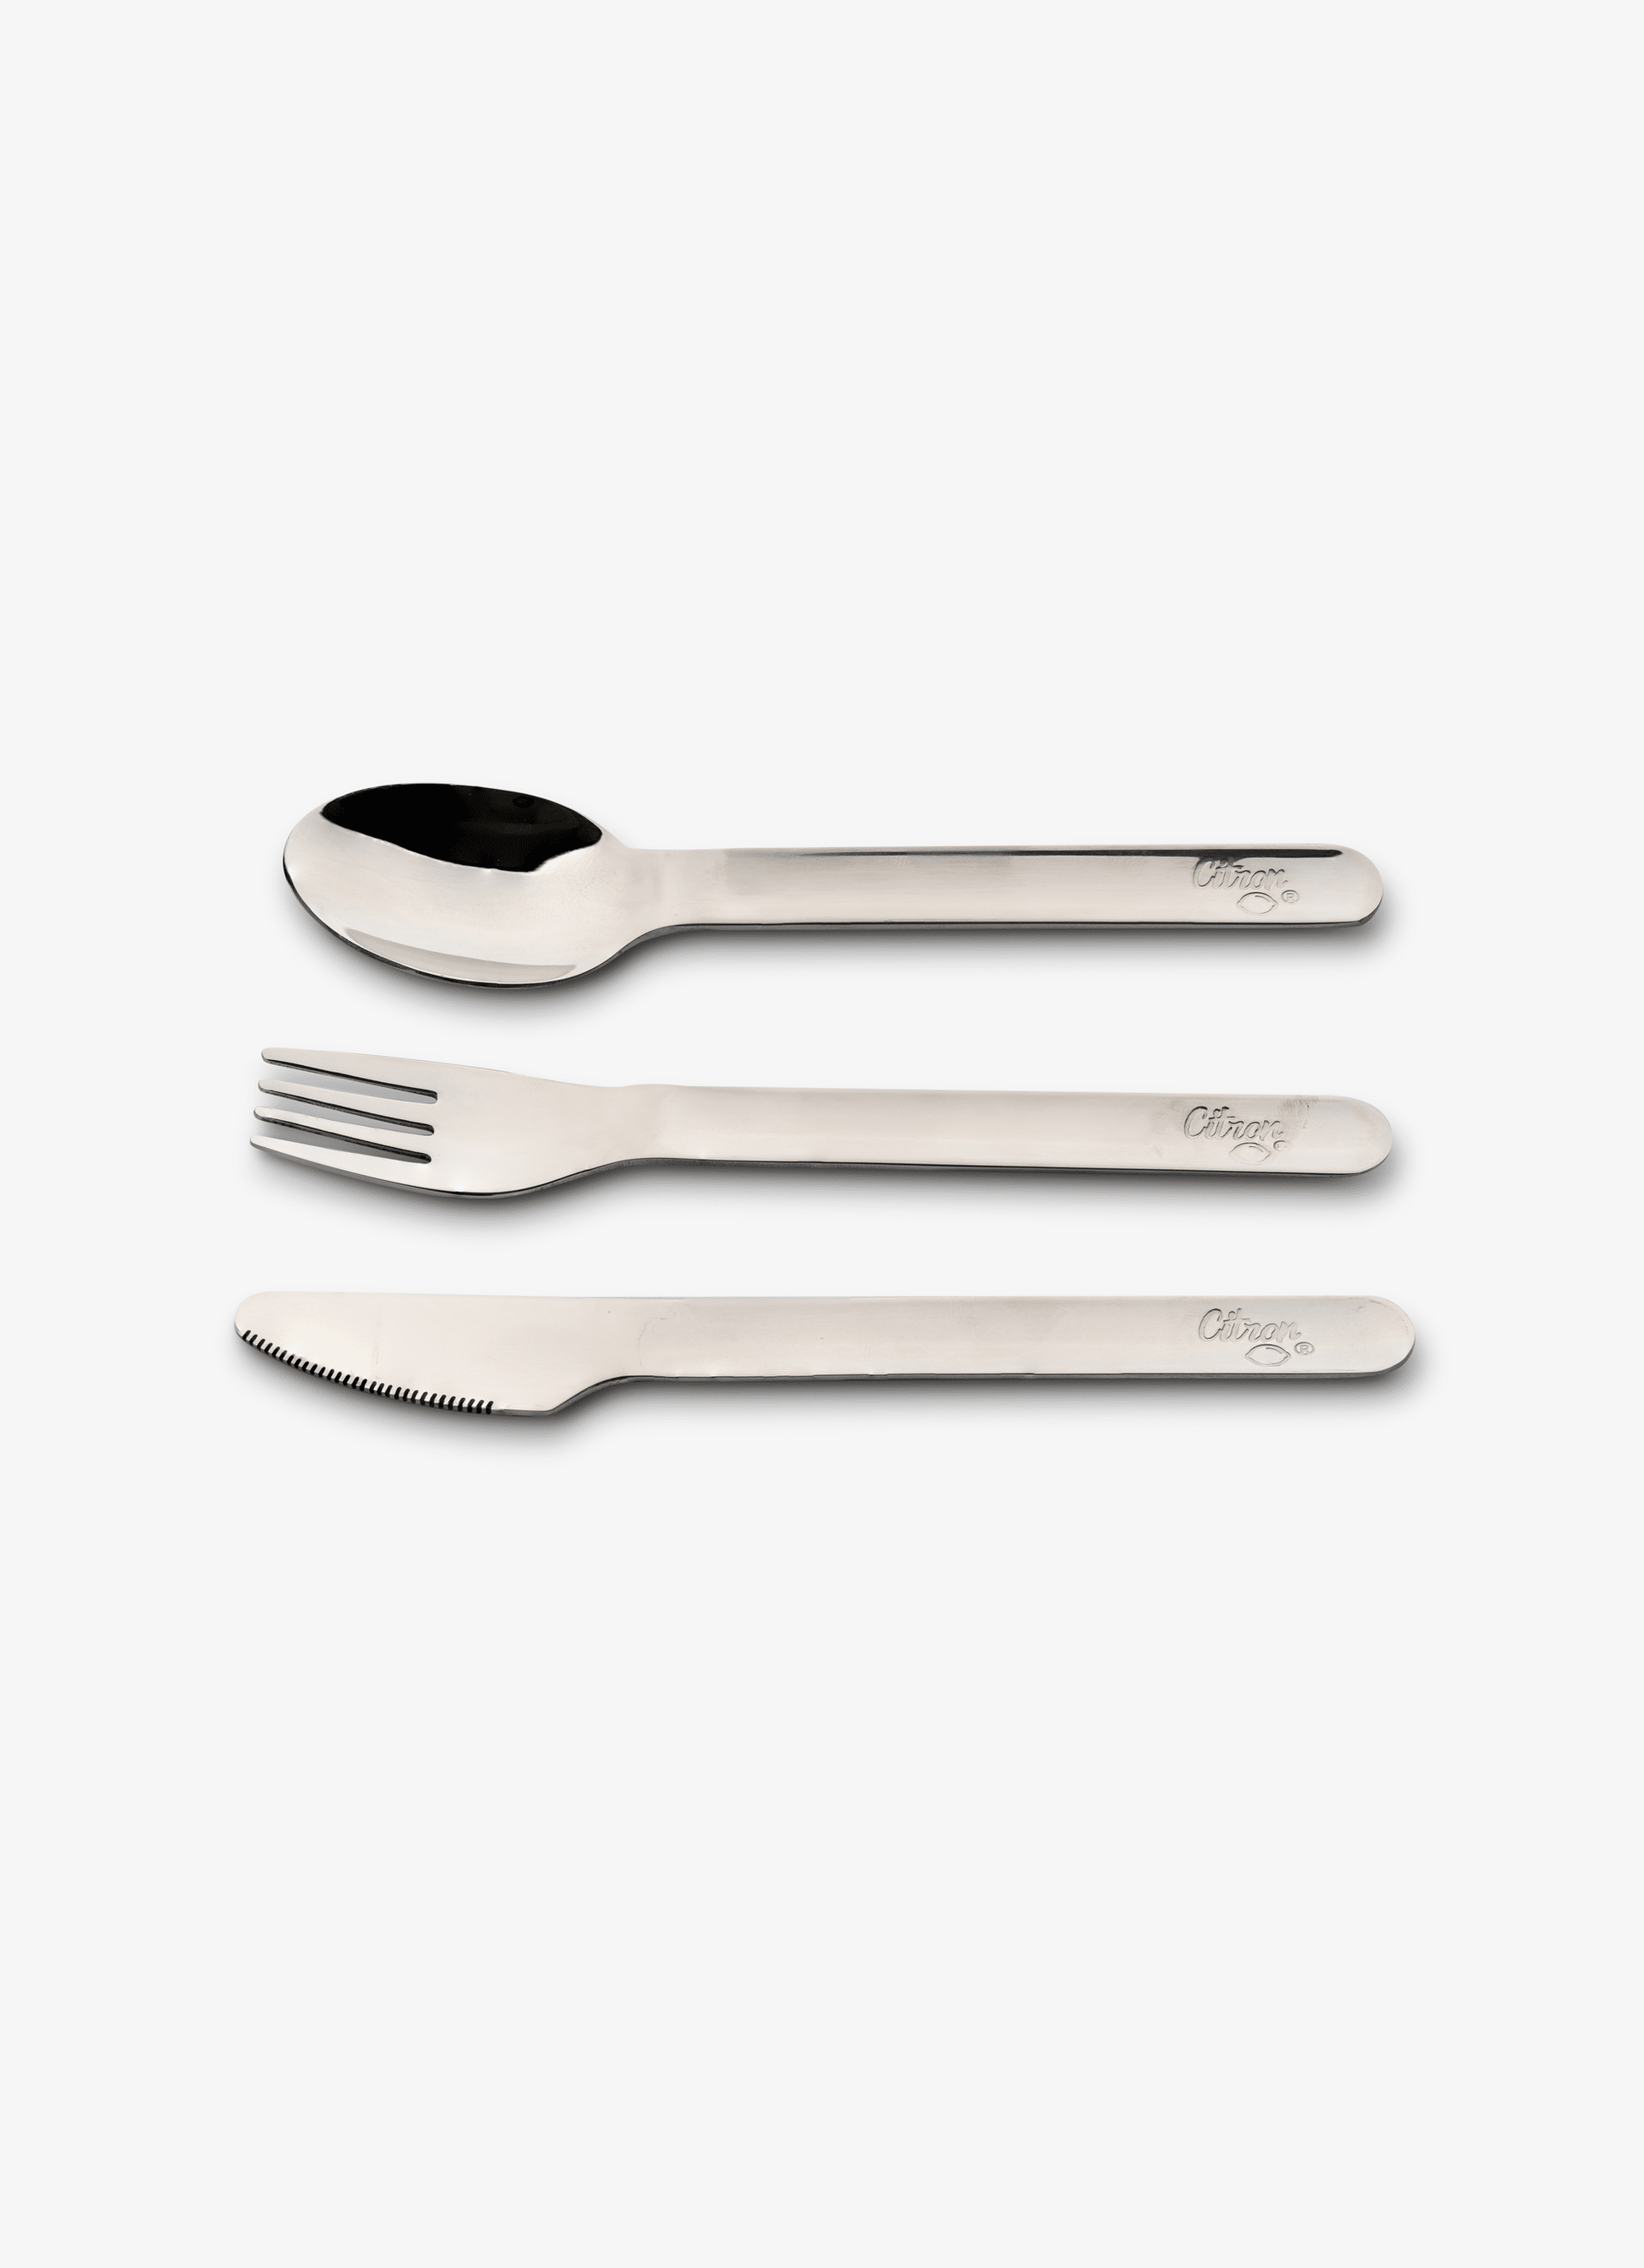 Citron Stainless Steel Cutlery Set with Brown Case - Laadlee